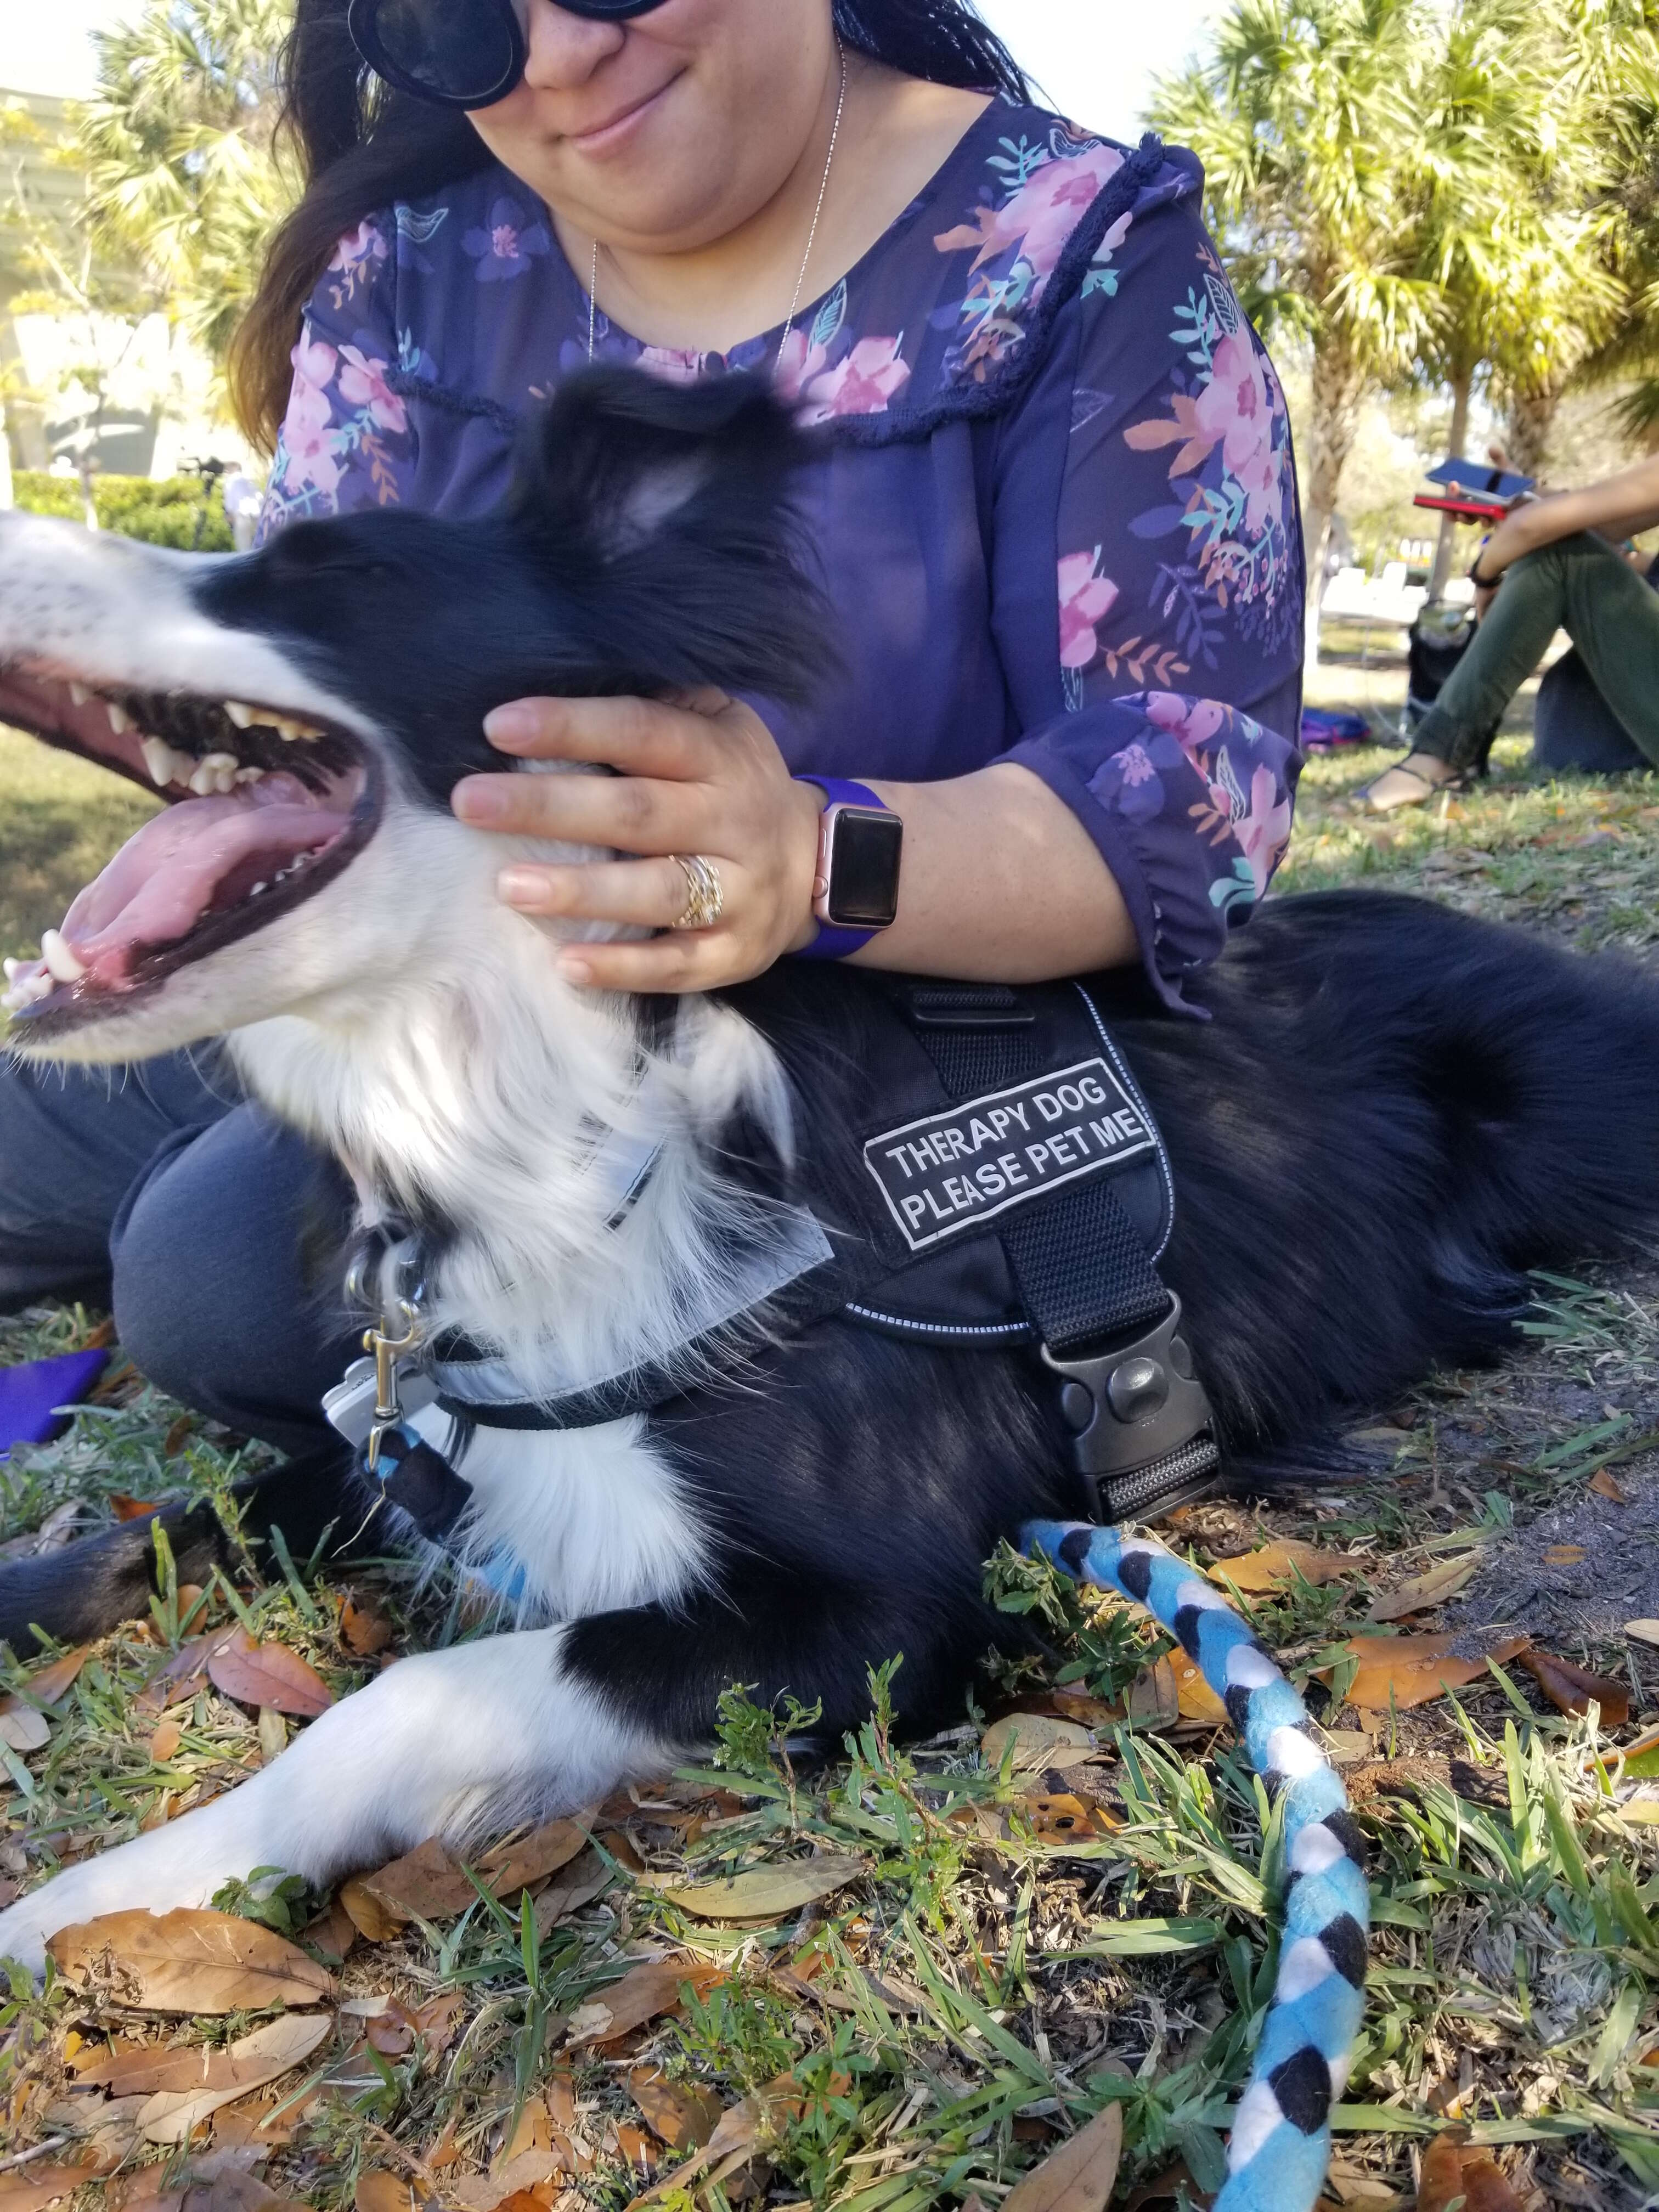 Therapy dog Kermit comforting Parkland, Florida, community after high school shooting